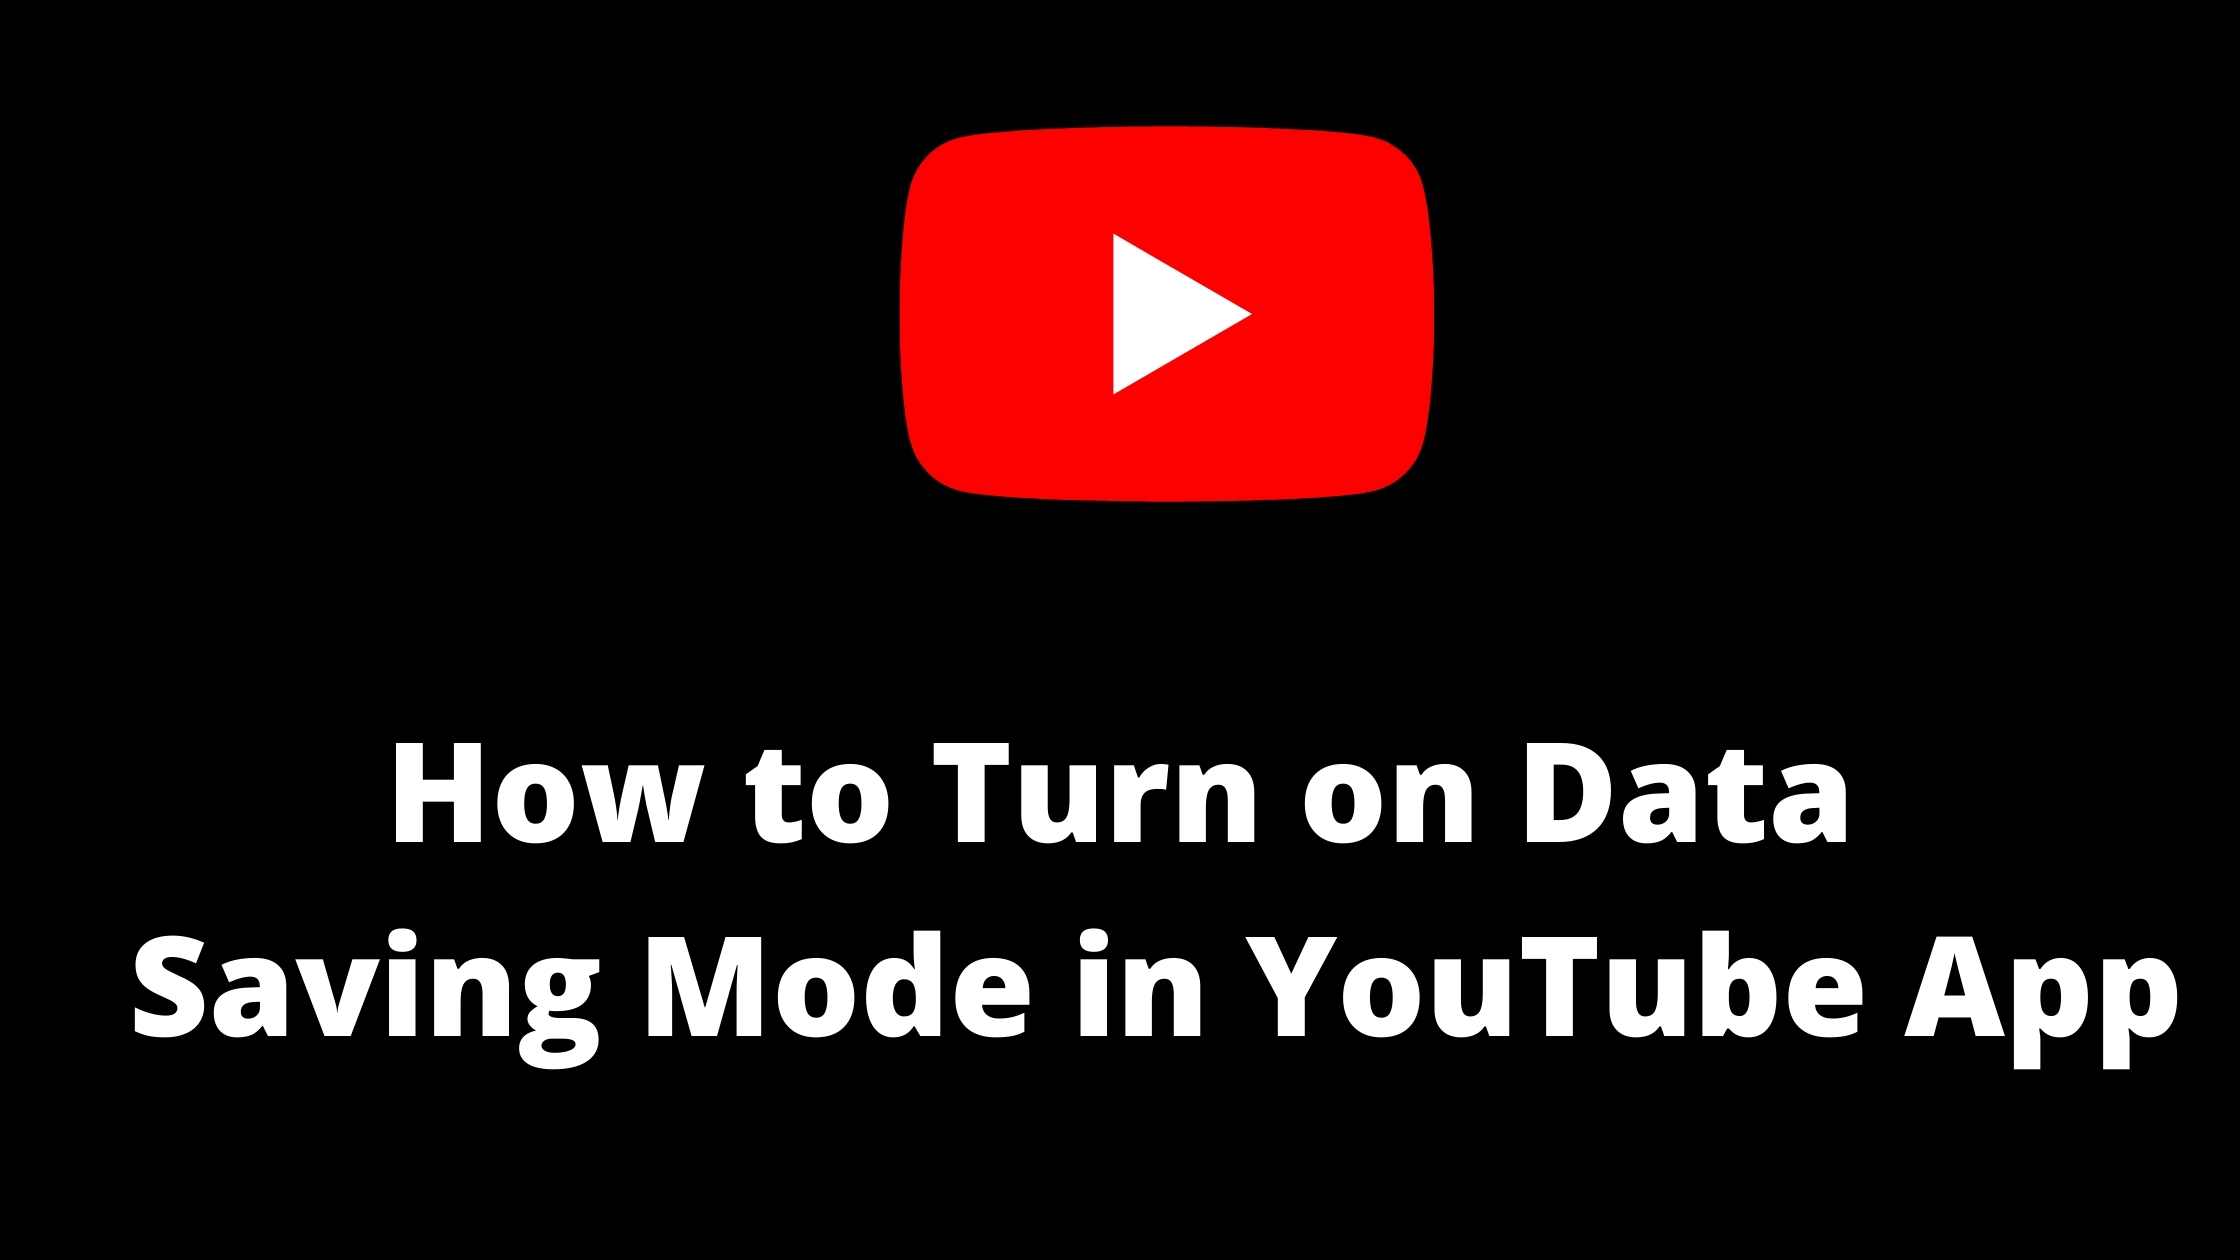 how to reduce data usage on YouTube app